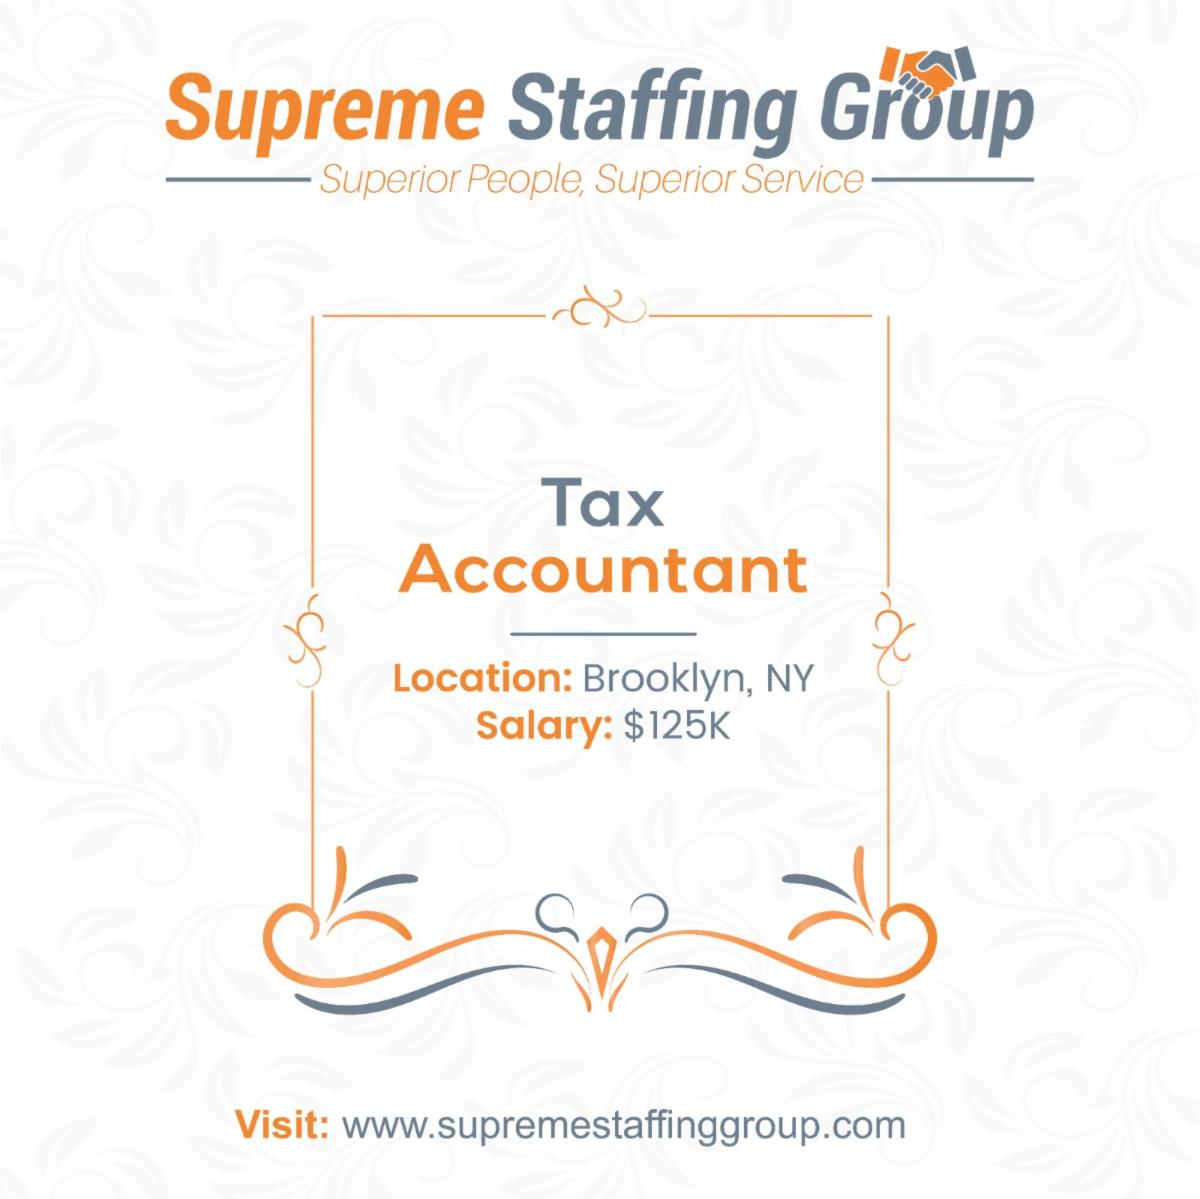 Our client, a CPA firm in Brooklyn NY, is looking for an experienced Tax Accountant. 

If you are  interested, apply directly on our website: bit.ly/3gT0PM7

#TaxAccountant #CPAFirm  #Opportunity #Innovation #Hiring #JobOpening #Career #JobPost